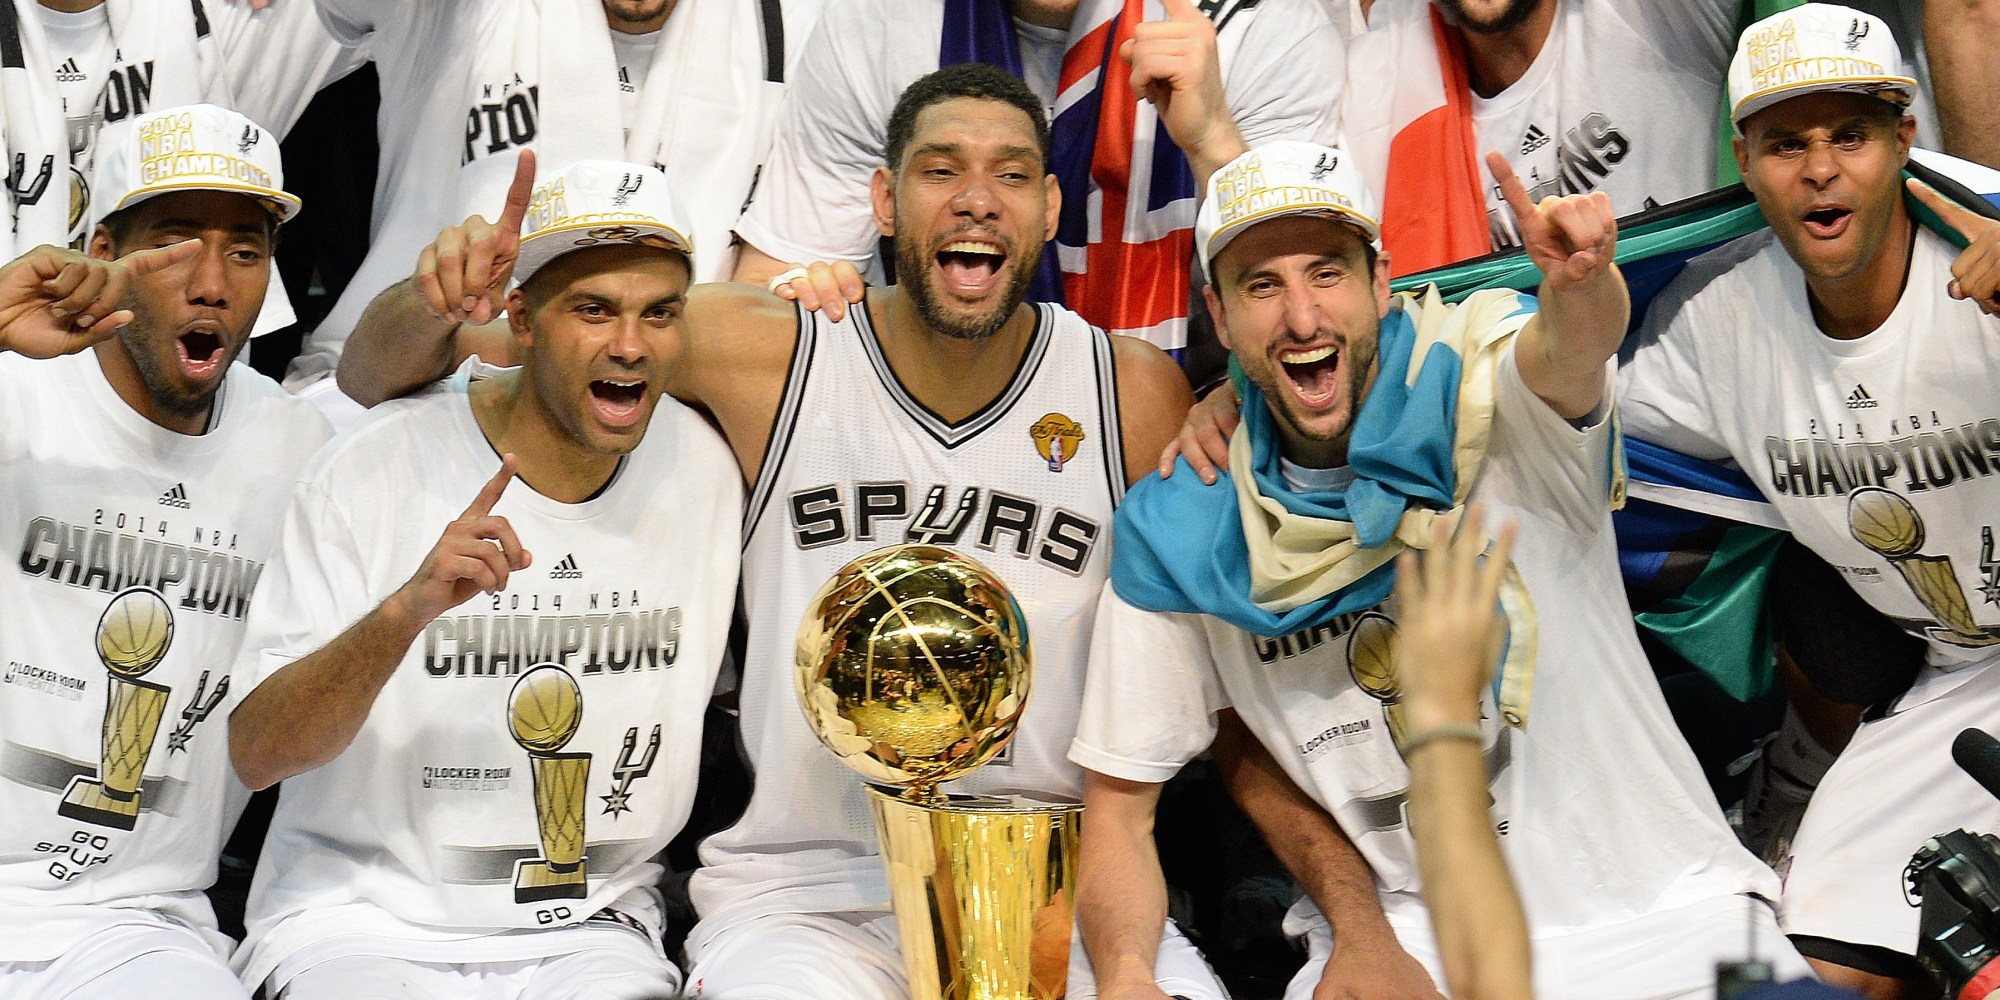 San Antonio Spurs Are Champions Again After Defeating Miami Heat In